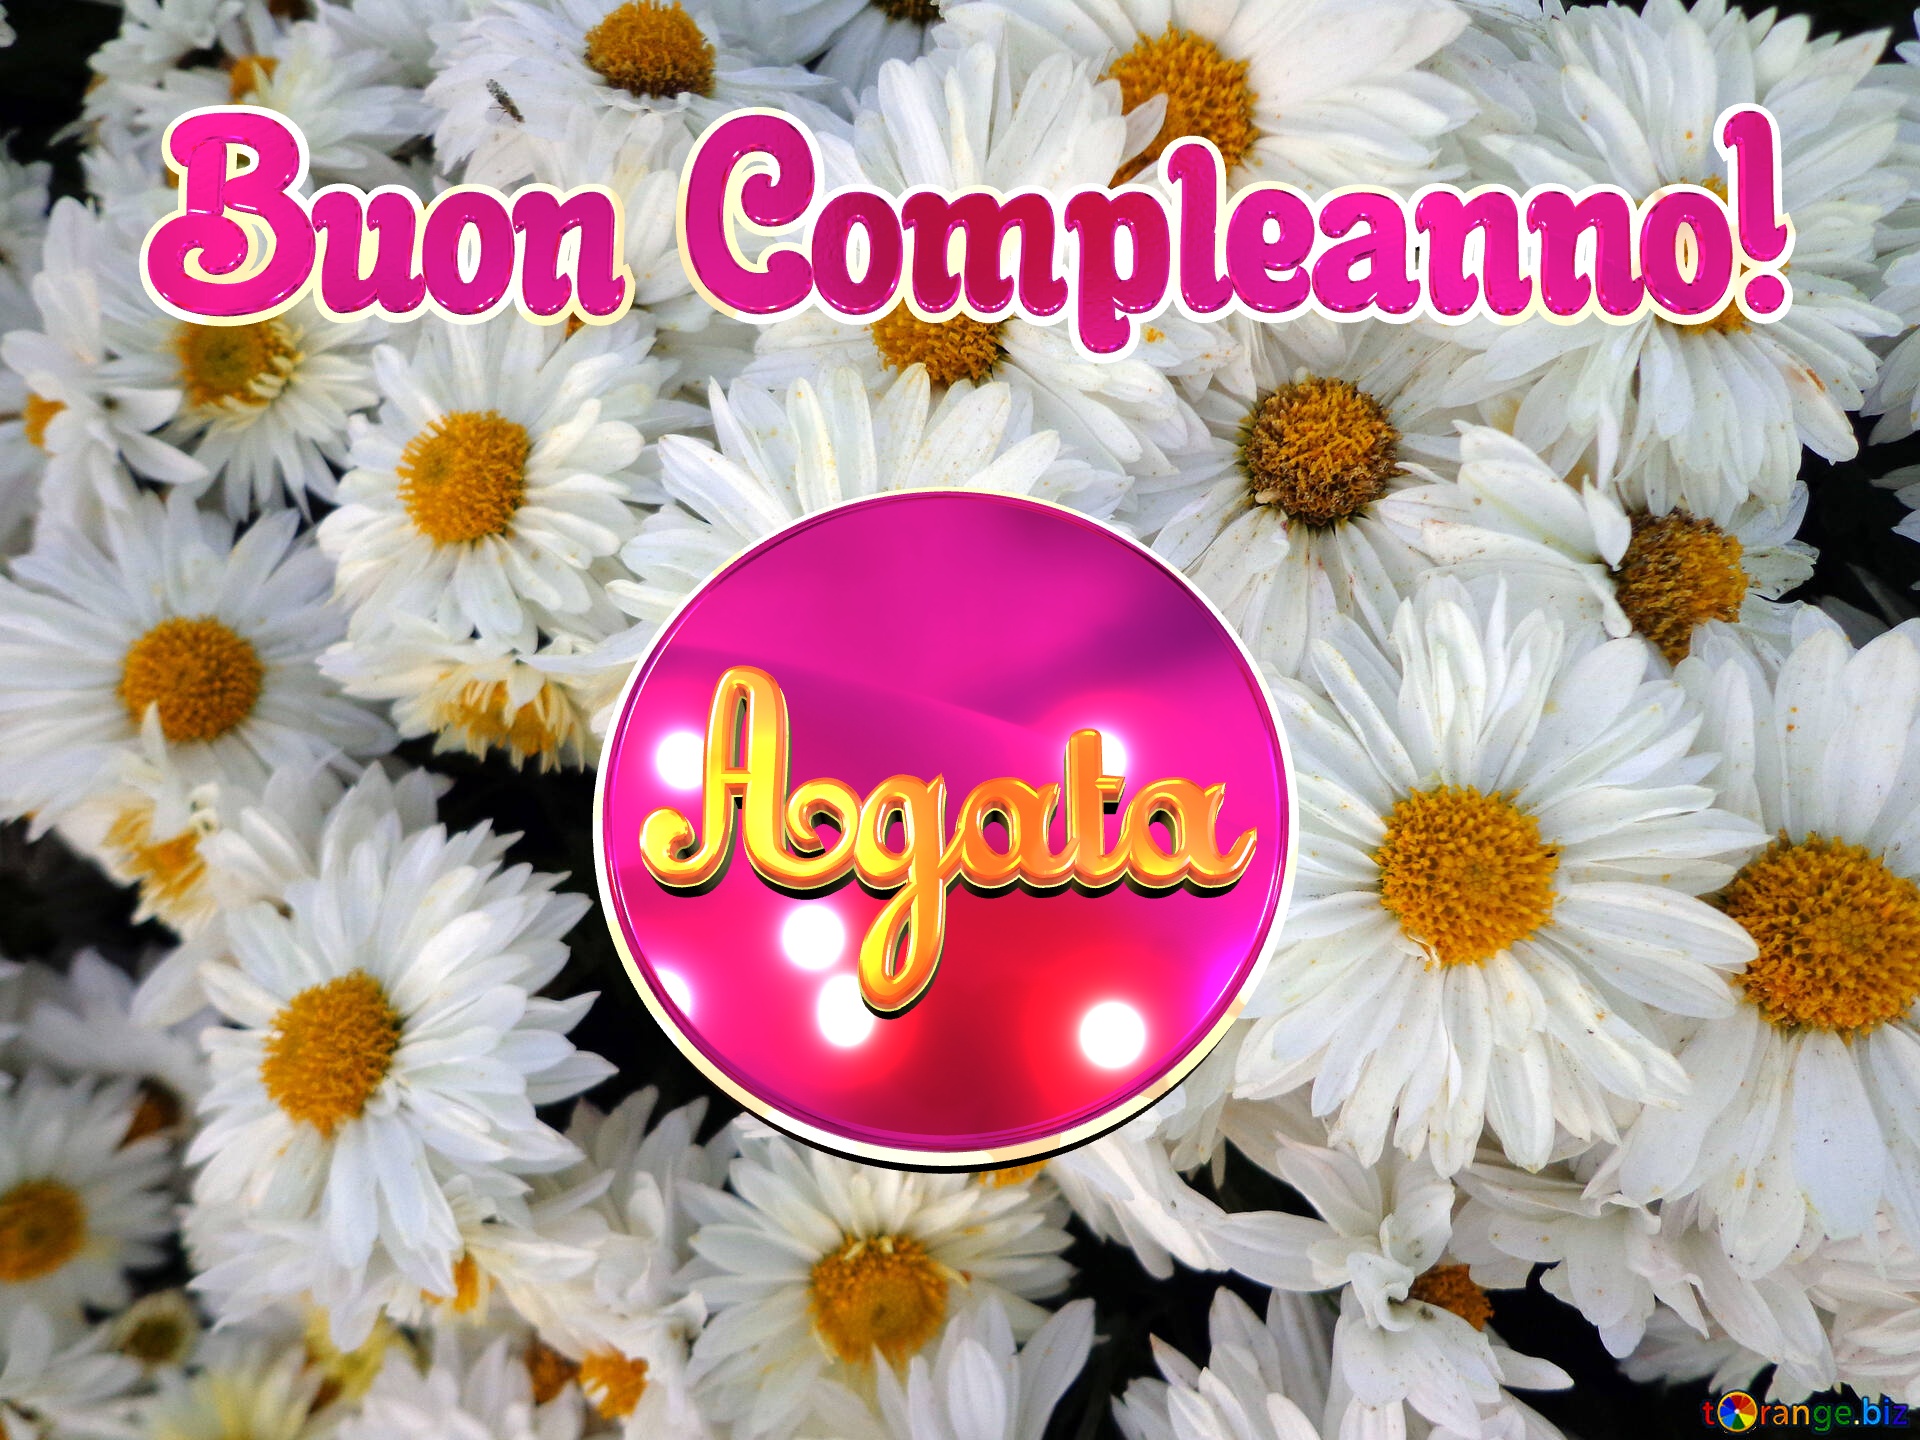 Agata Buon Compleanno! Background flowers №14165